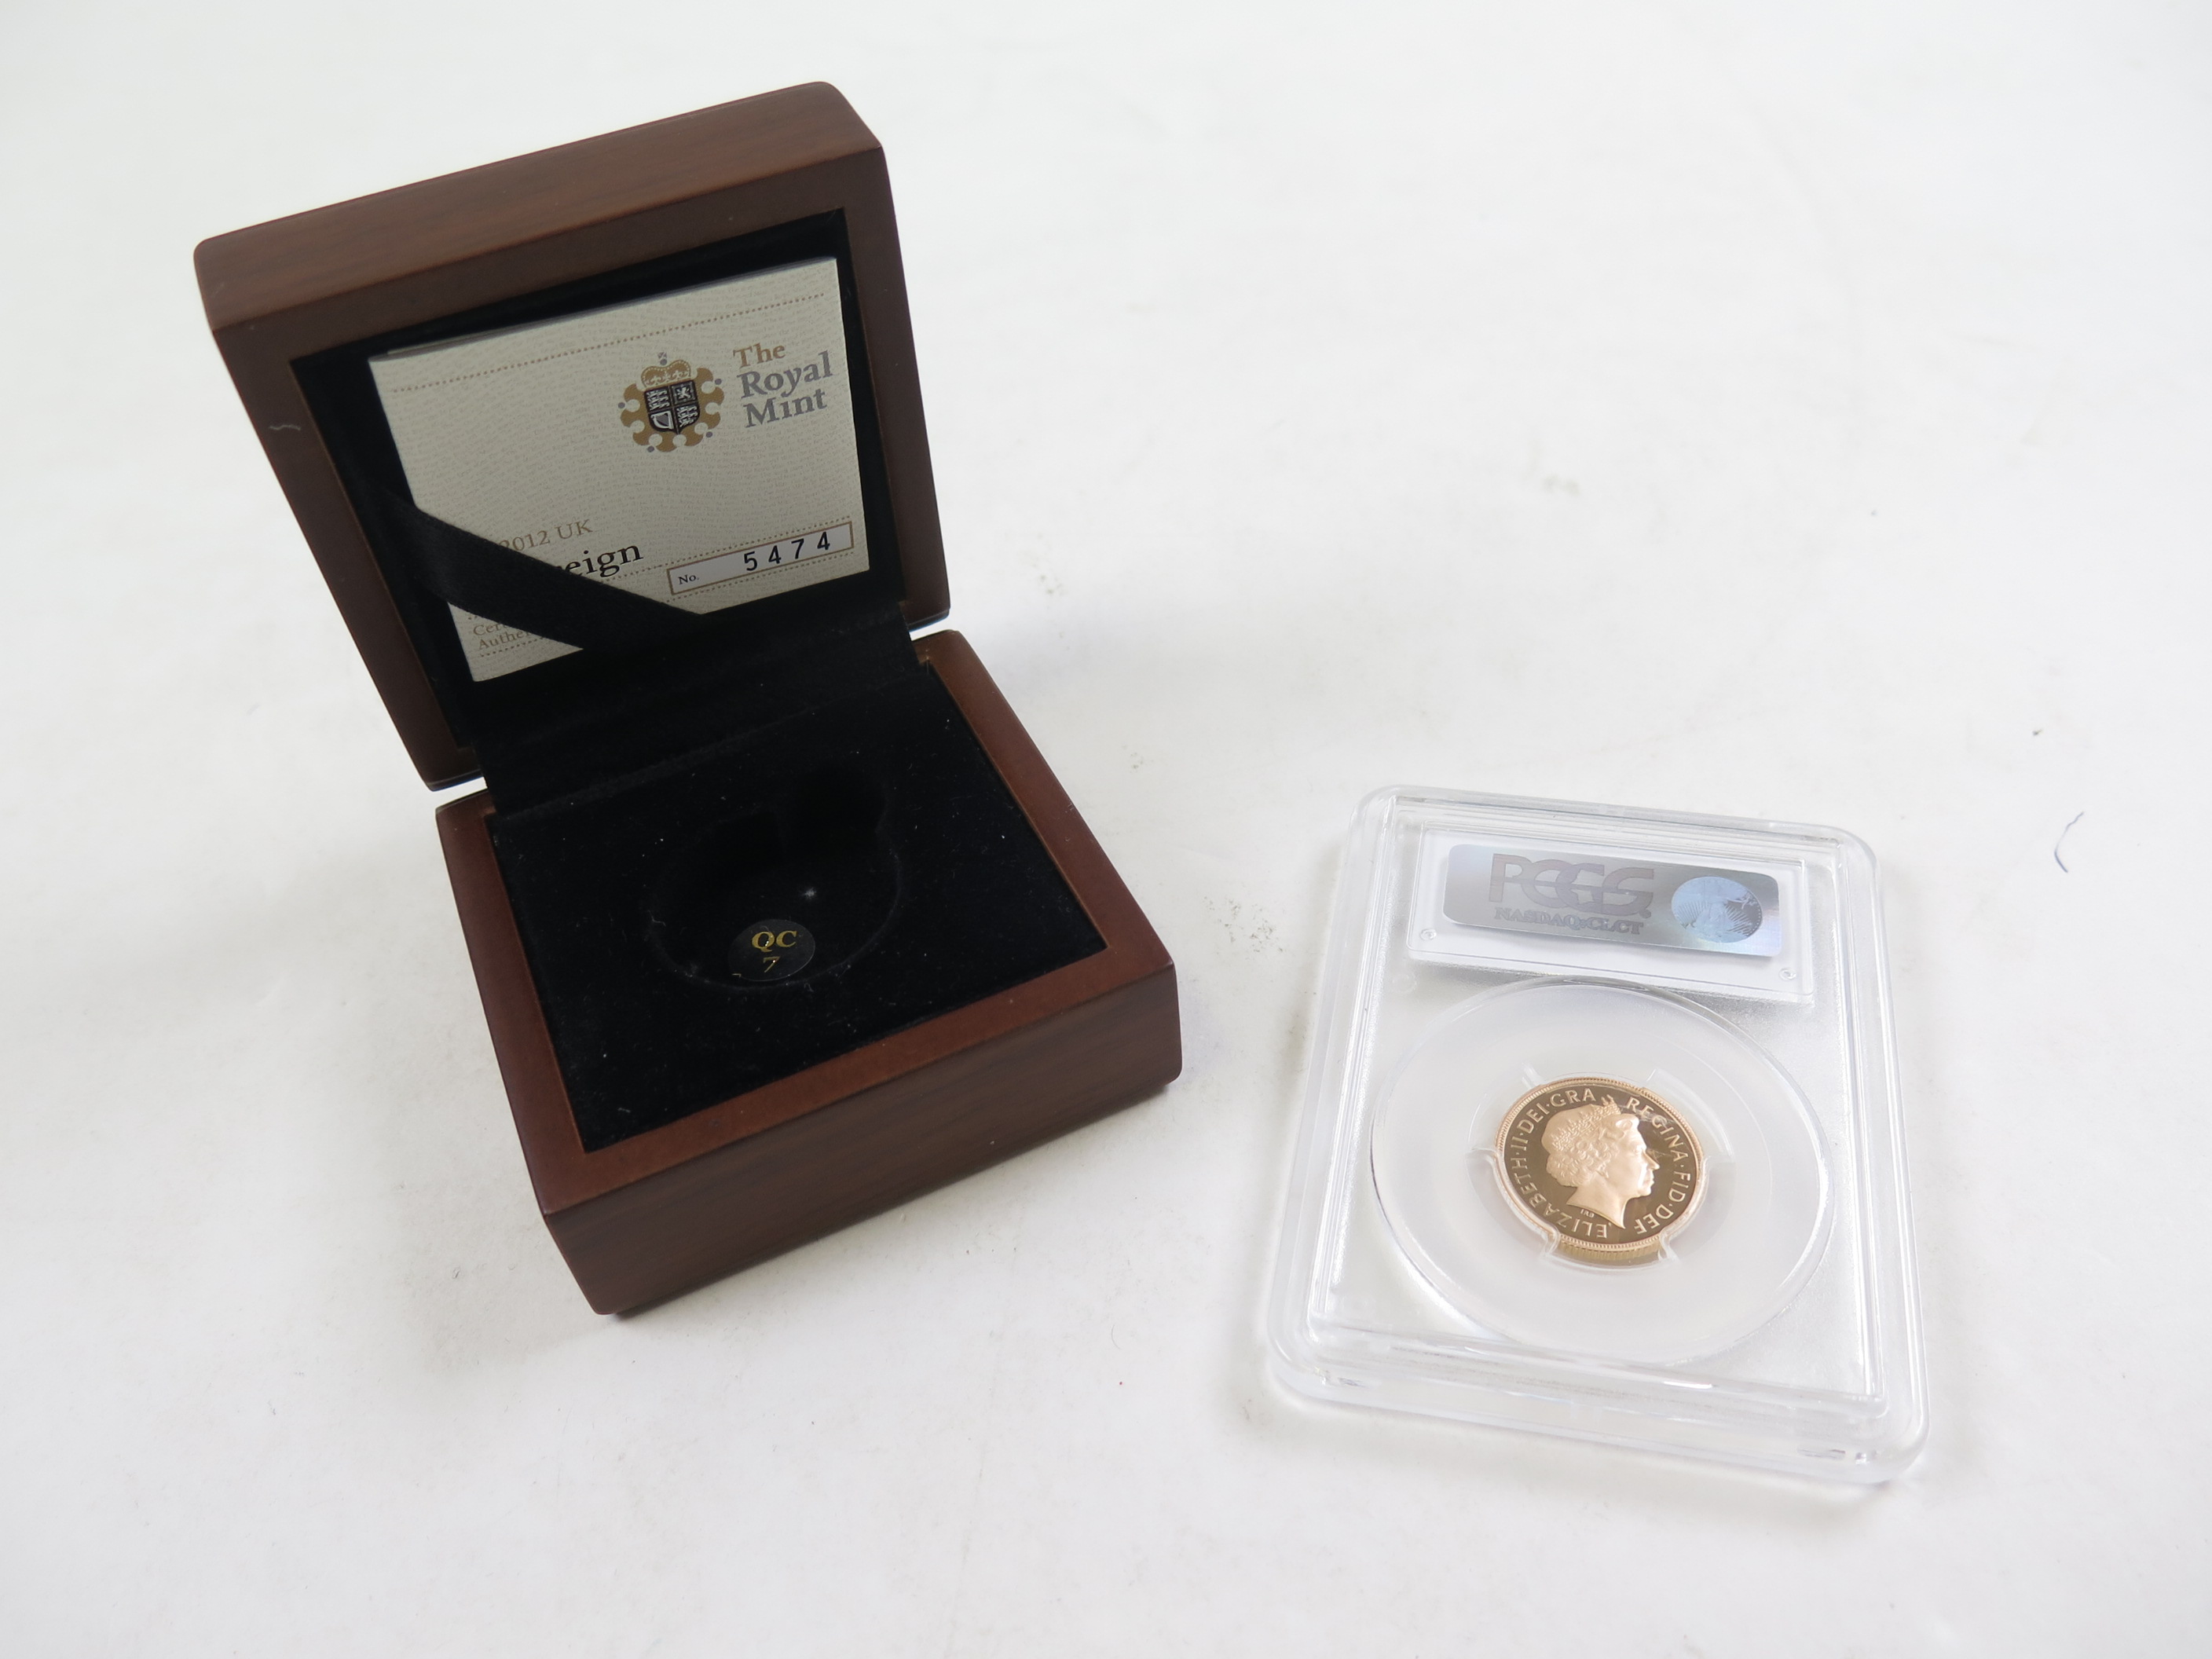 Sovereign 2012 PCGS slabbed as PR70DCAM along with its original box and certificate